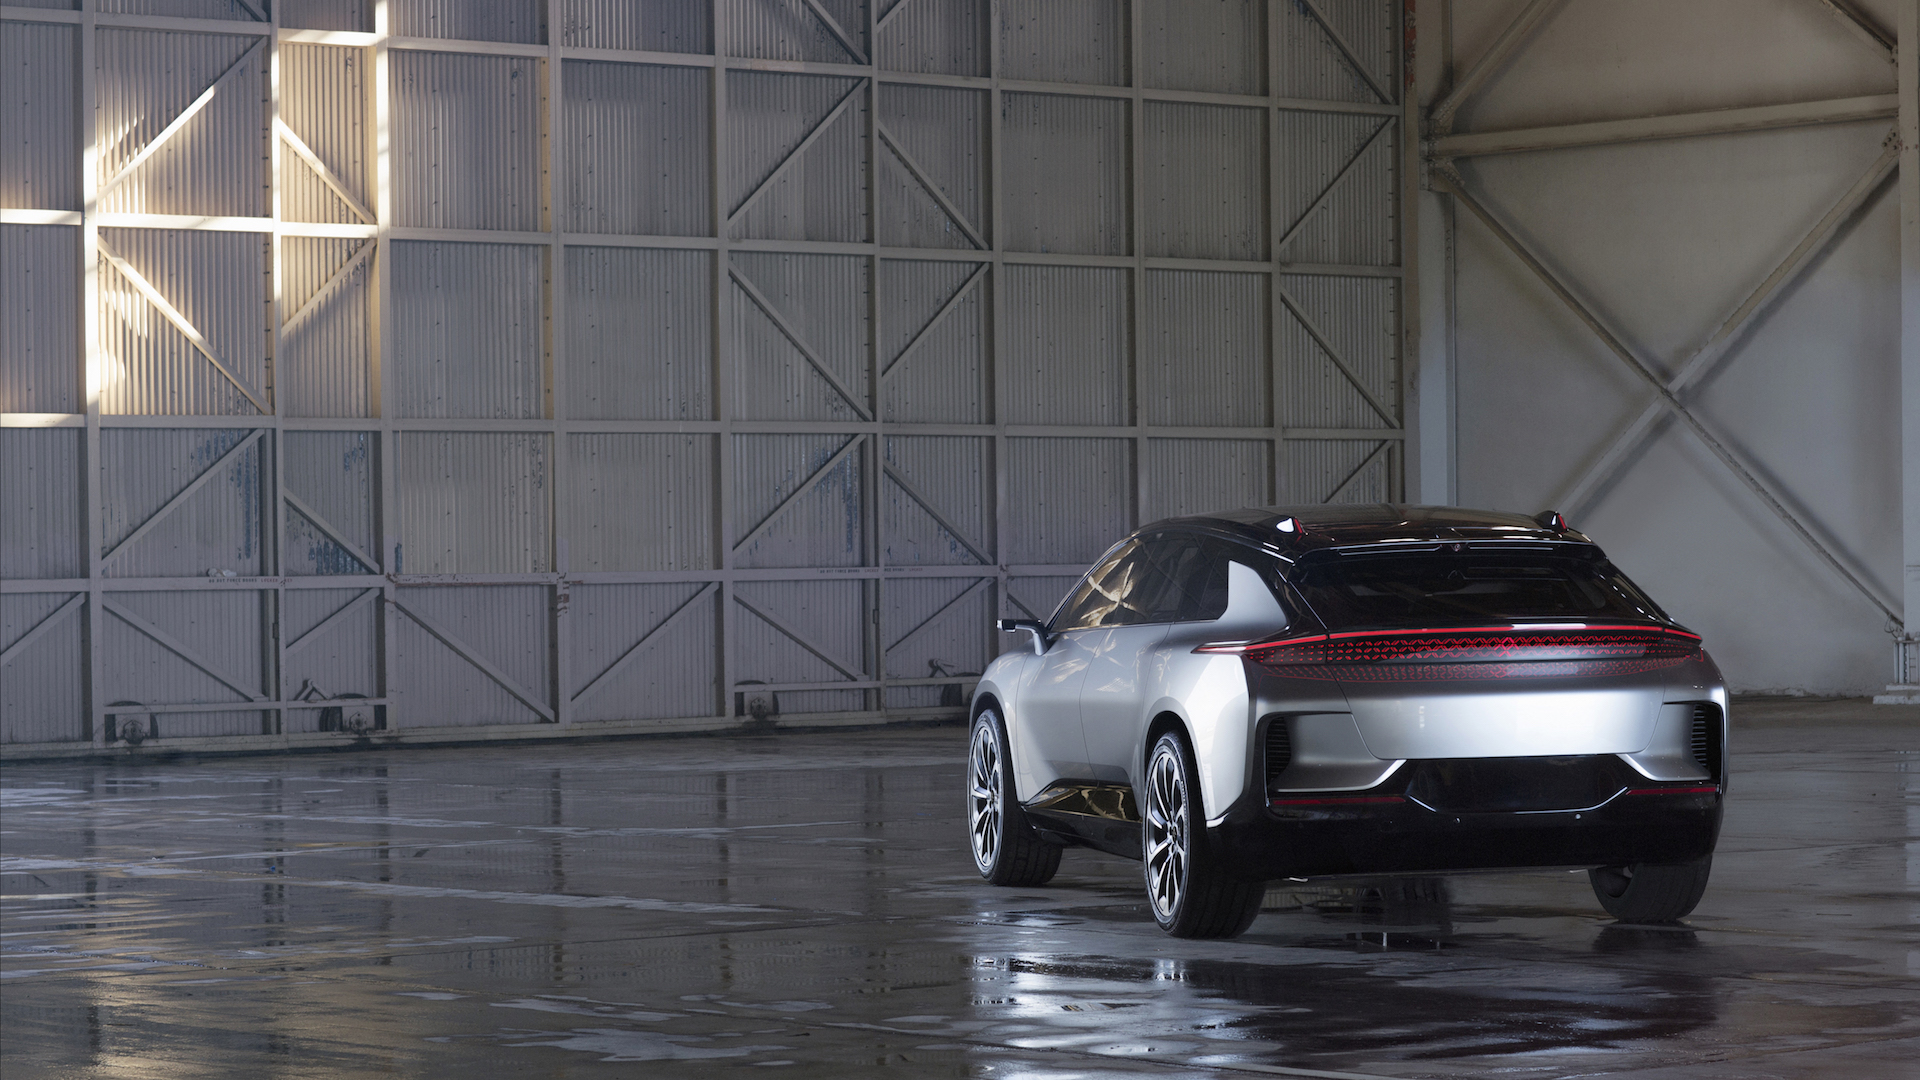 Faraday Future FF 81 EV slated for "high volume production" in 2024—at GM's former South Korea plantFaraday Future FF 81 EV slated for "high volume production" in 2024—at GM's former South Korea plant